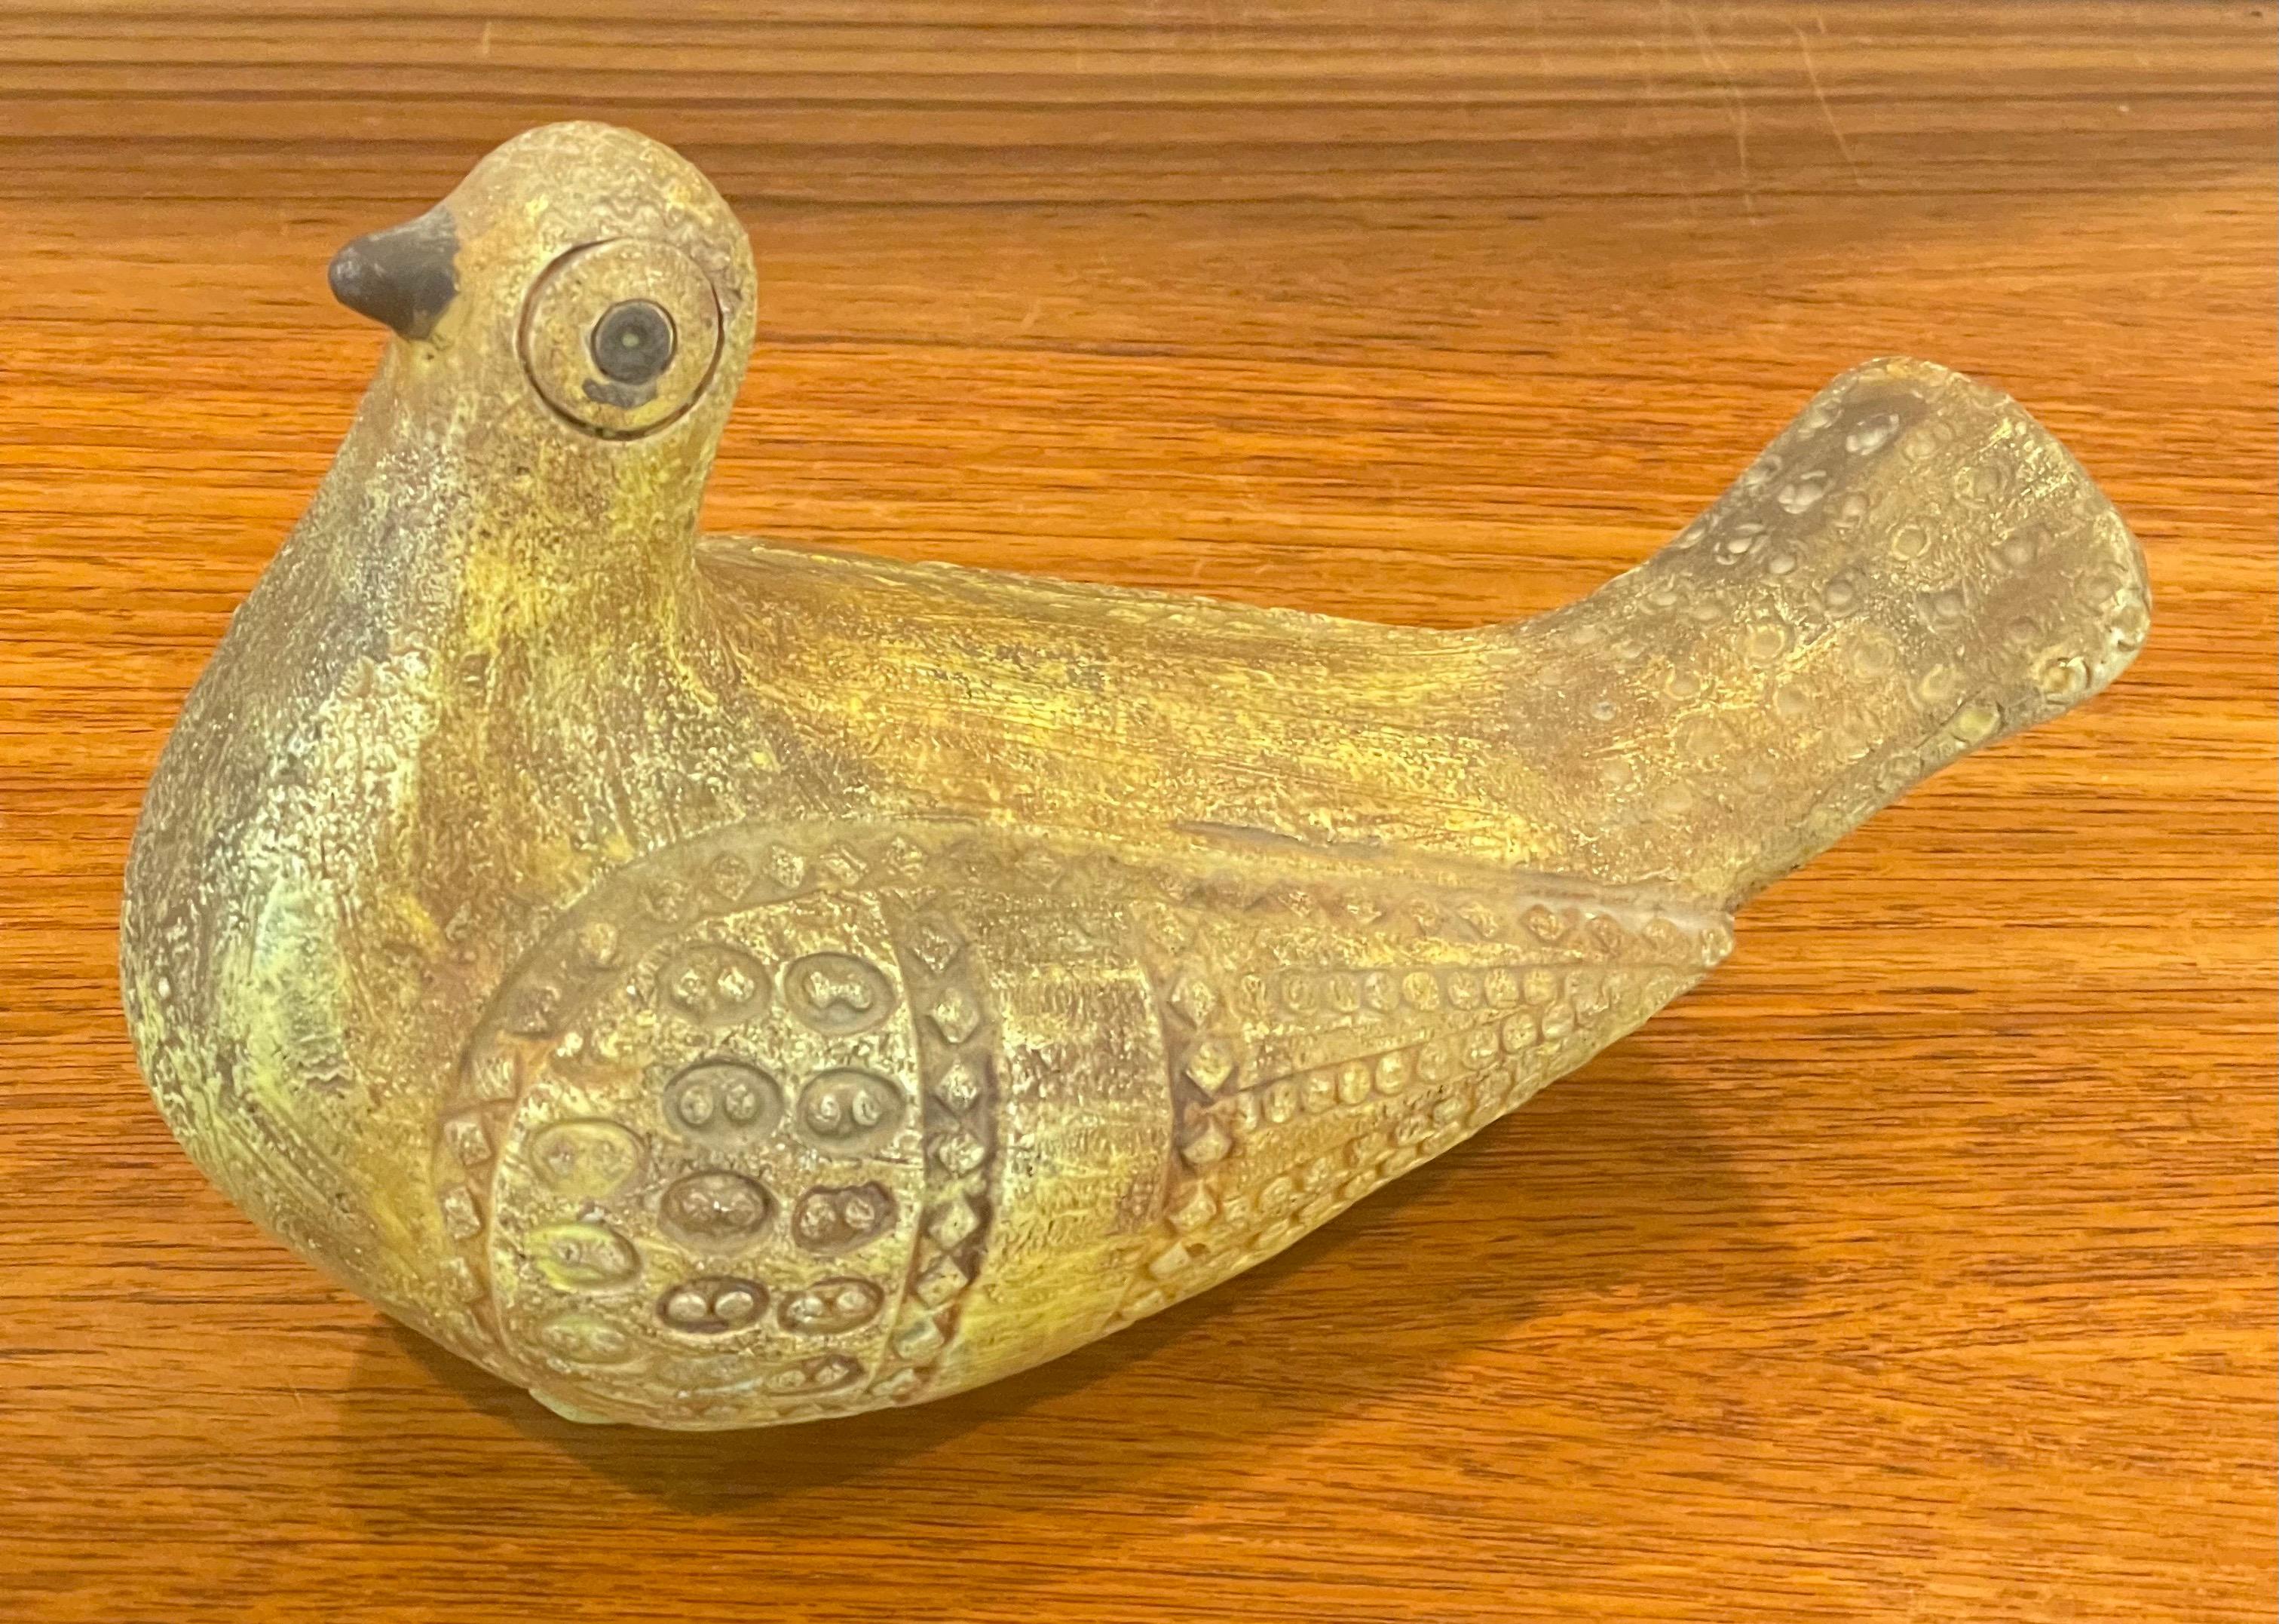 Vintage ceramiche bird sculpture by Aldo Londi for Bitossi Raymor, circa 1960s. The piece is in very good vintage condition with great color and texture; it would make a fantastic addition to any mid-century collection. The bird measures 9